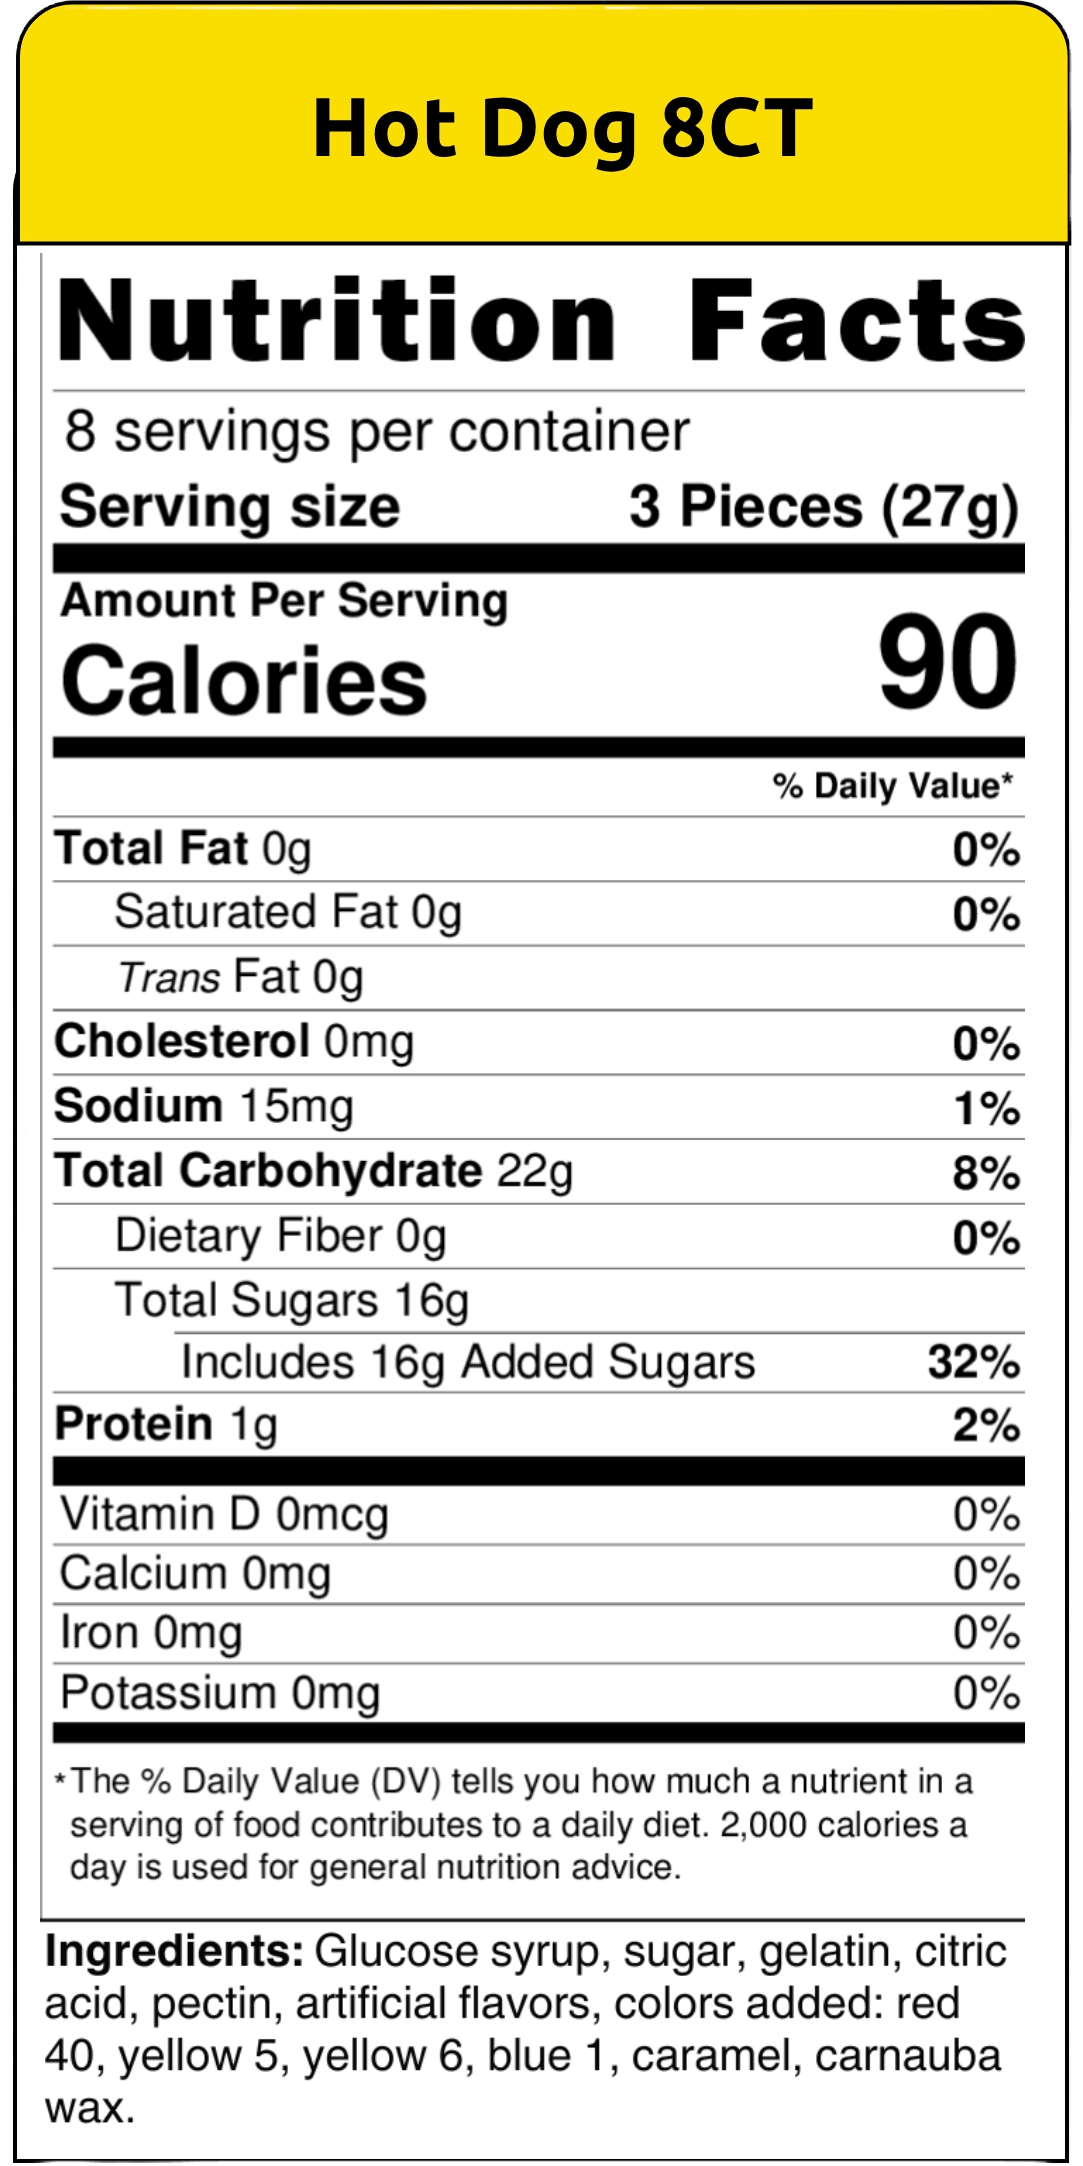 nutritional facts hot dog